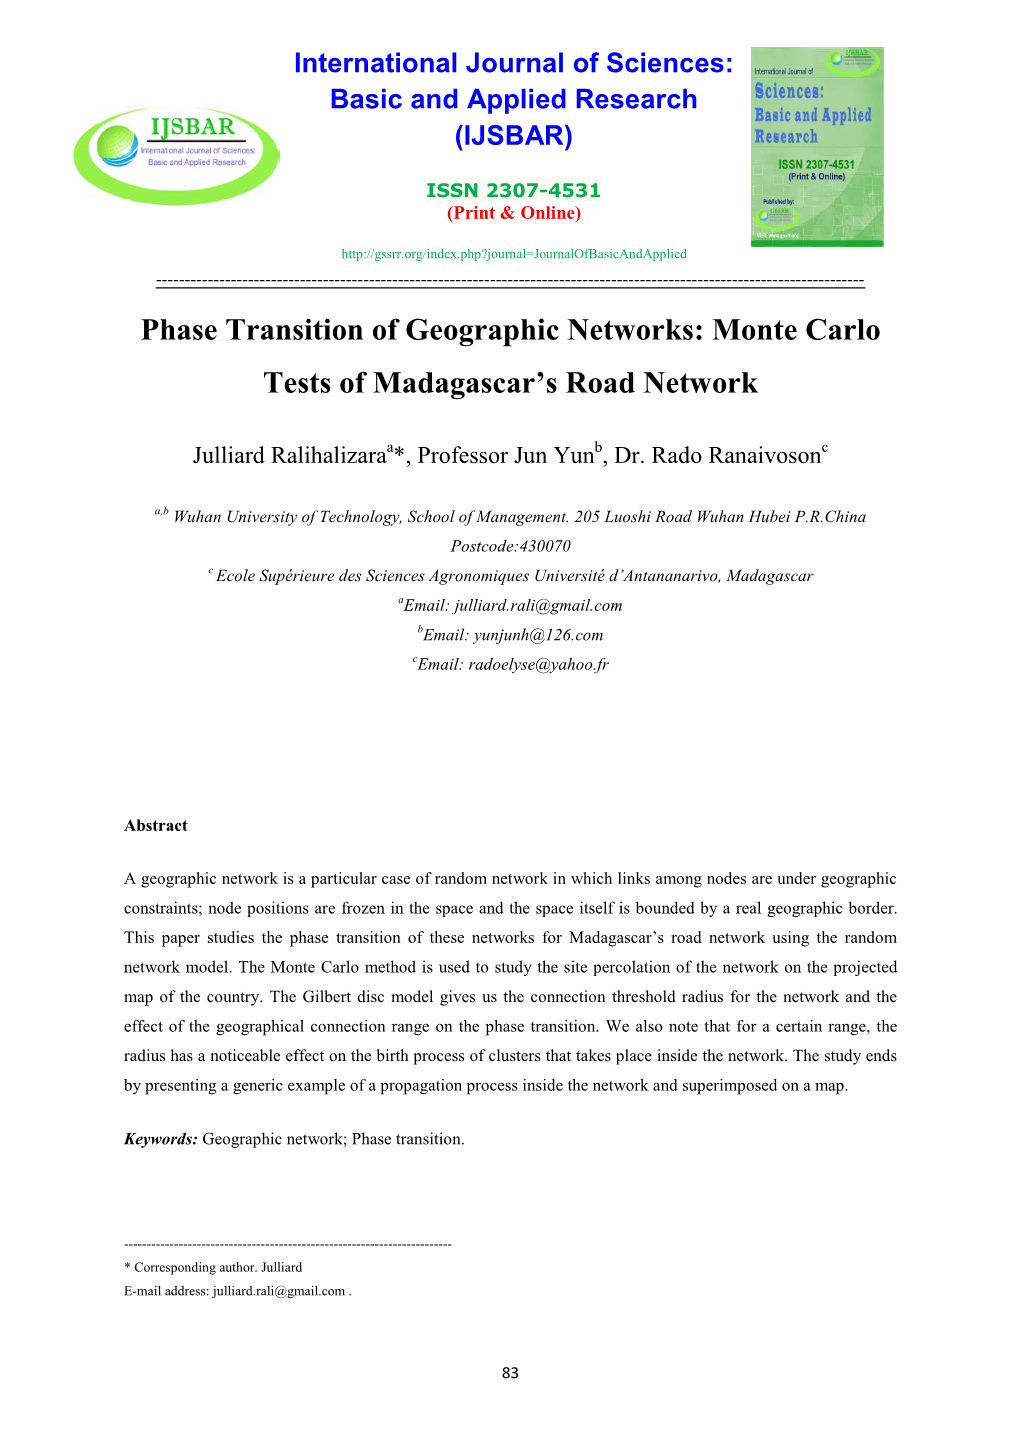 Phase Transition of Geographic Networks: Monte Carlo Tests of Madagascar’S Road Network